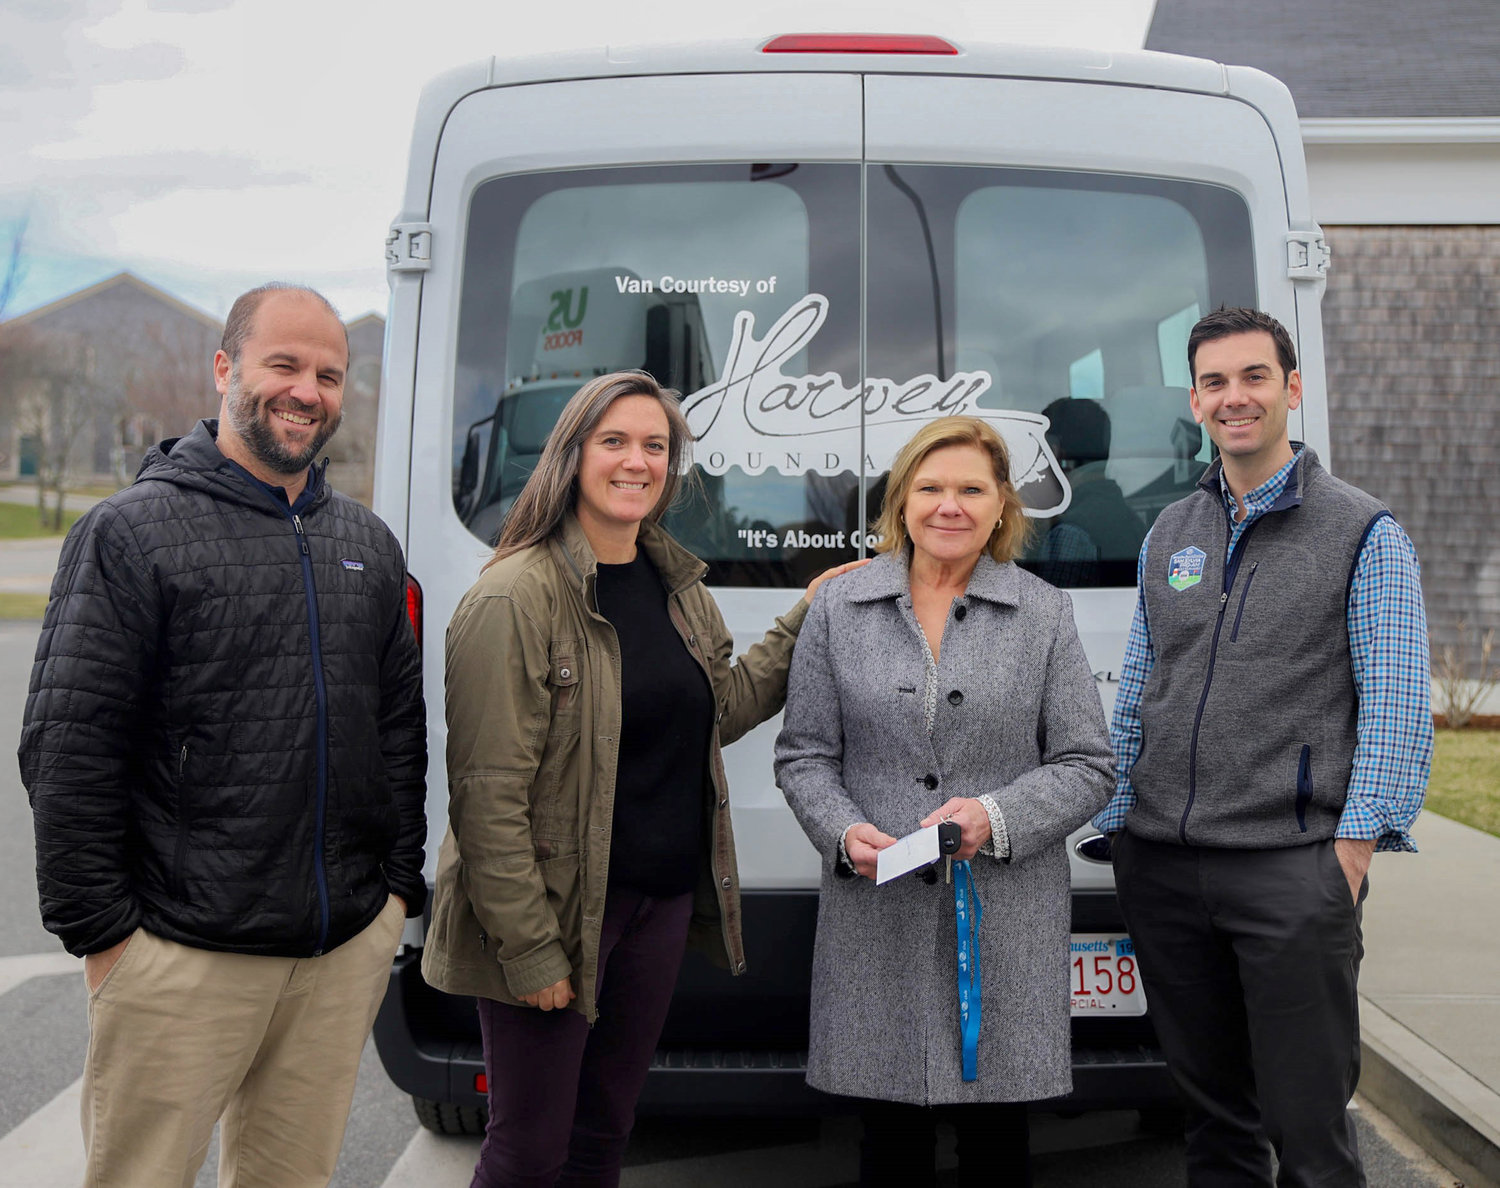 In 2019, the Harvey Foundation raised $10,000 in its annual three-on-three Basketball Tournament to help fund a new van for Nantucket Boys & Girls Club. From left: Travis and Adrienne Lombardi from the Harvey Foundation and Phyllis McInerney and Jamie Foster from the Boys & Girls Club.